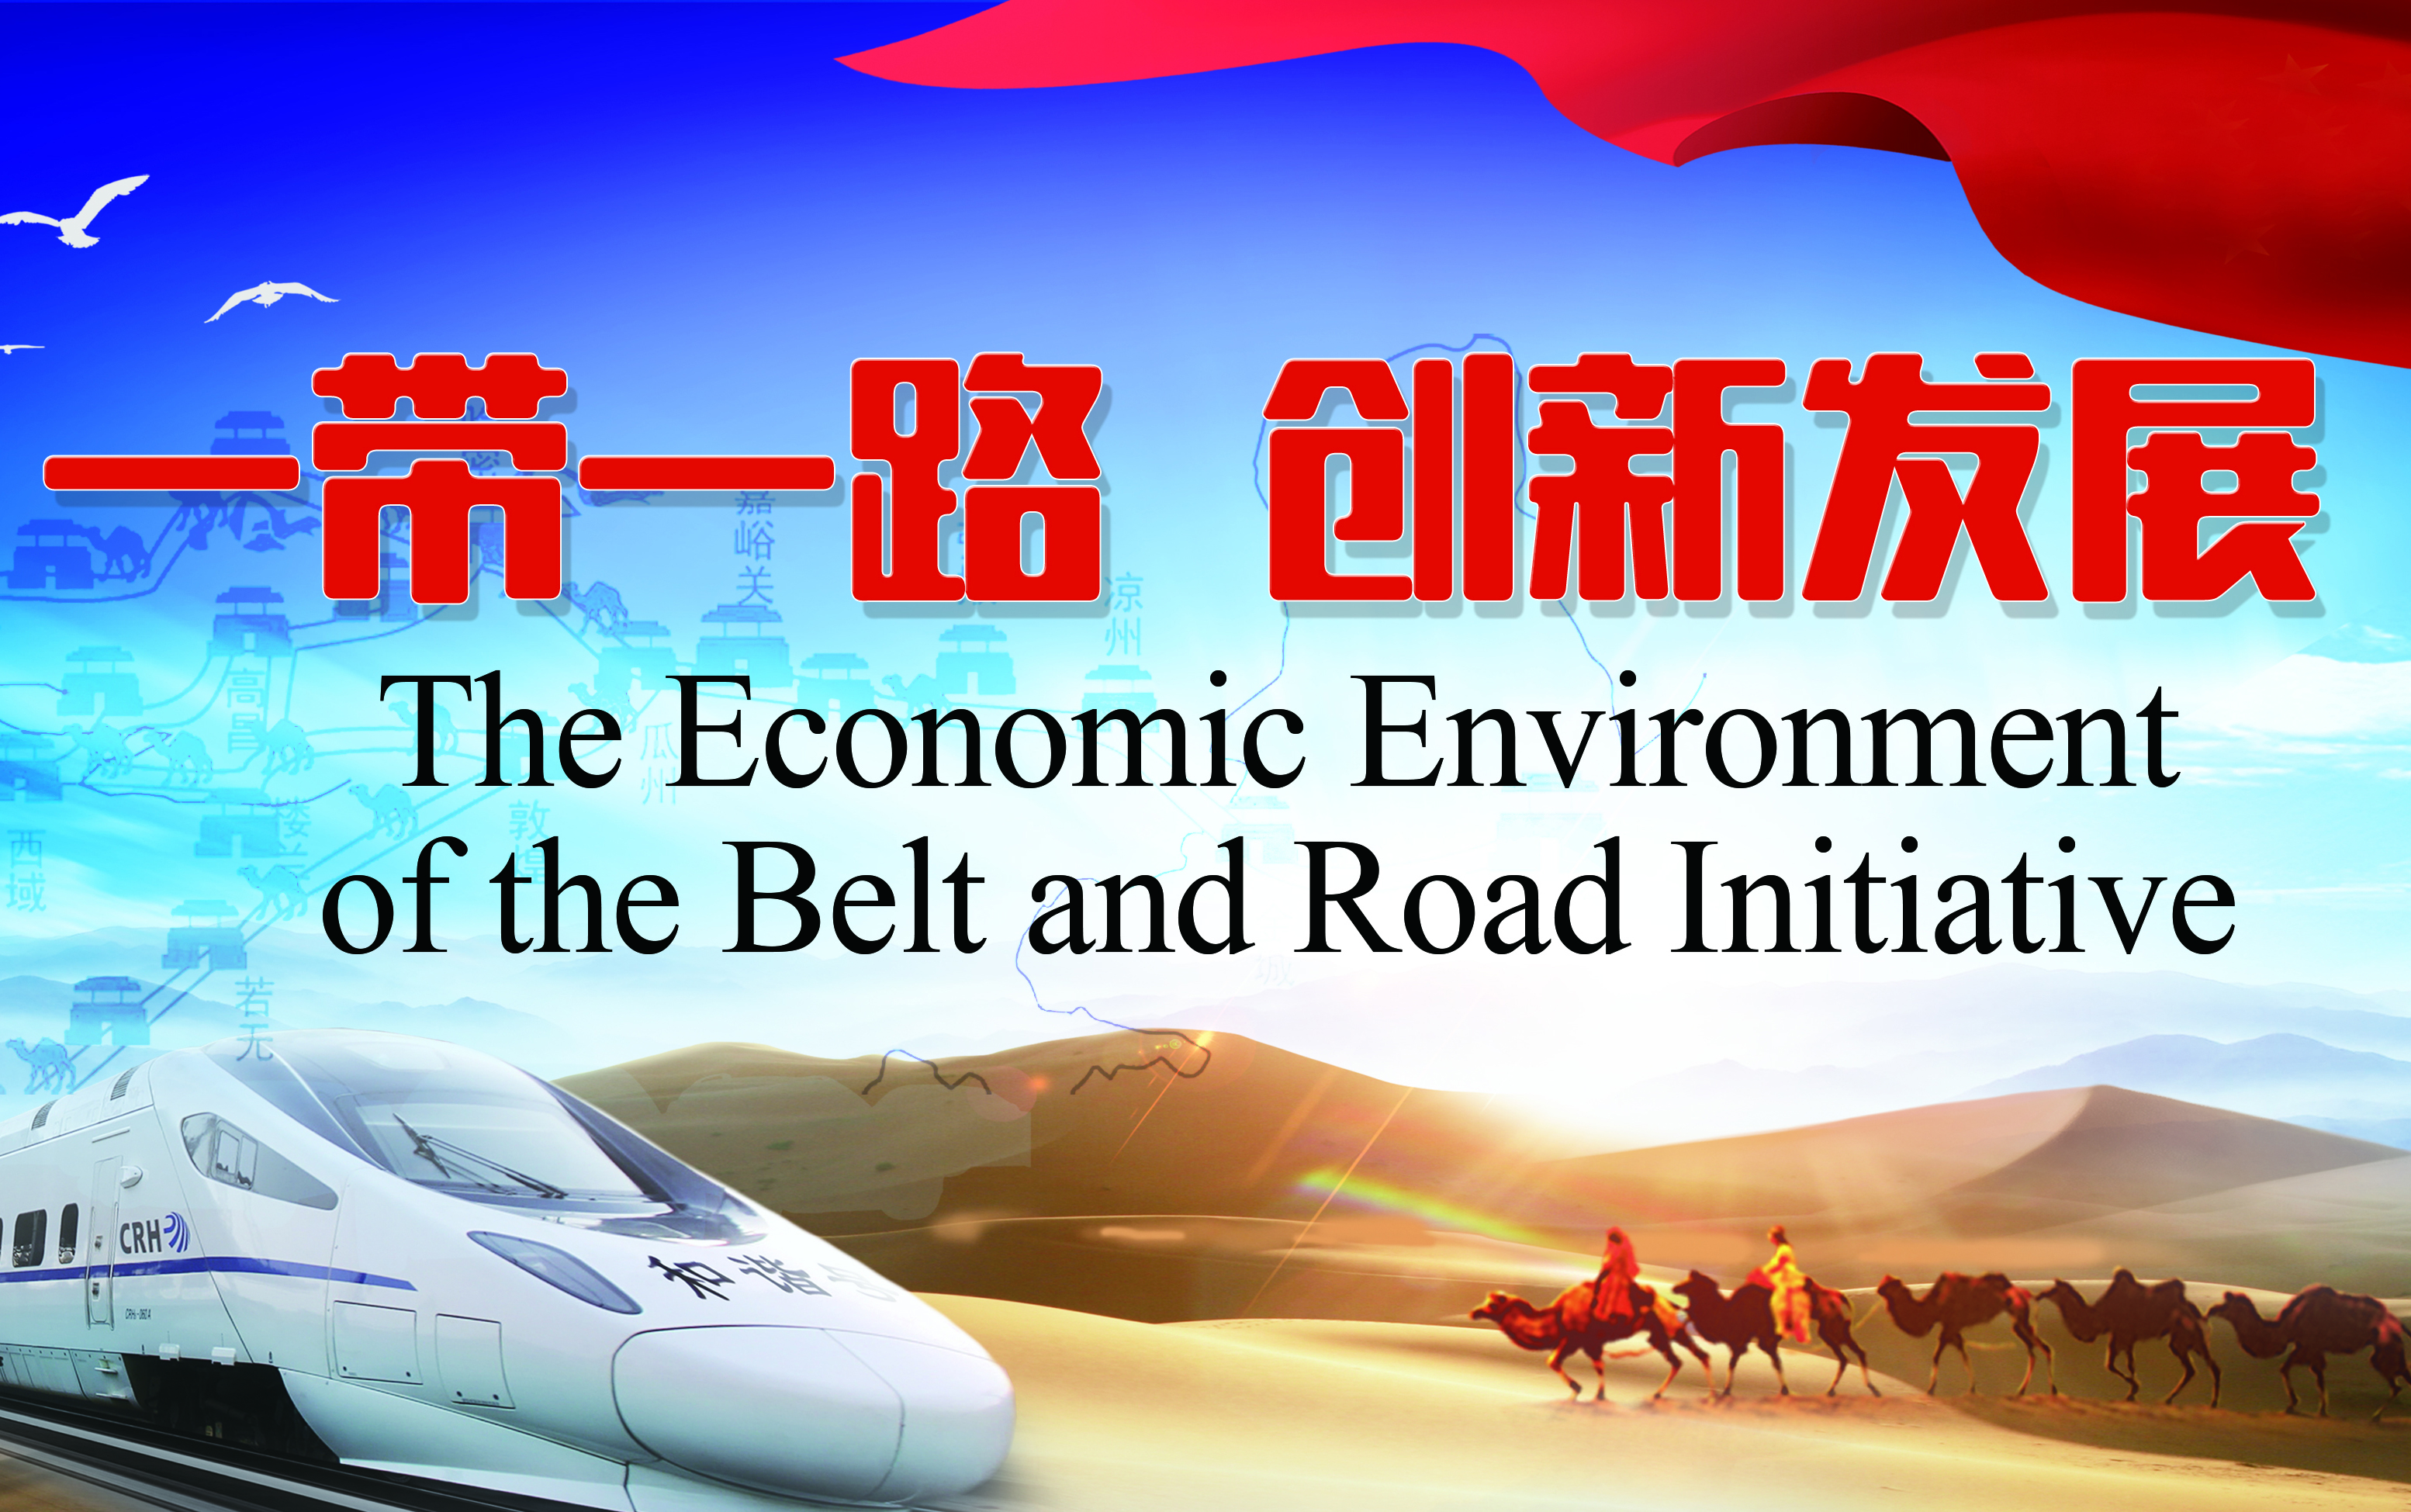 The Economic Environment of the Belt and Road Initiative